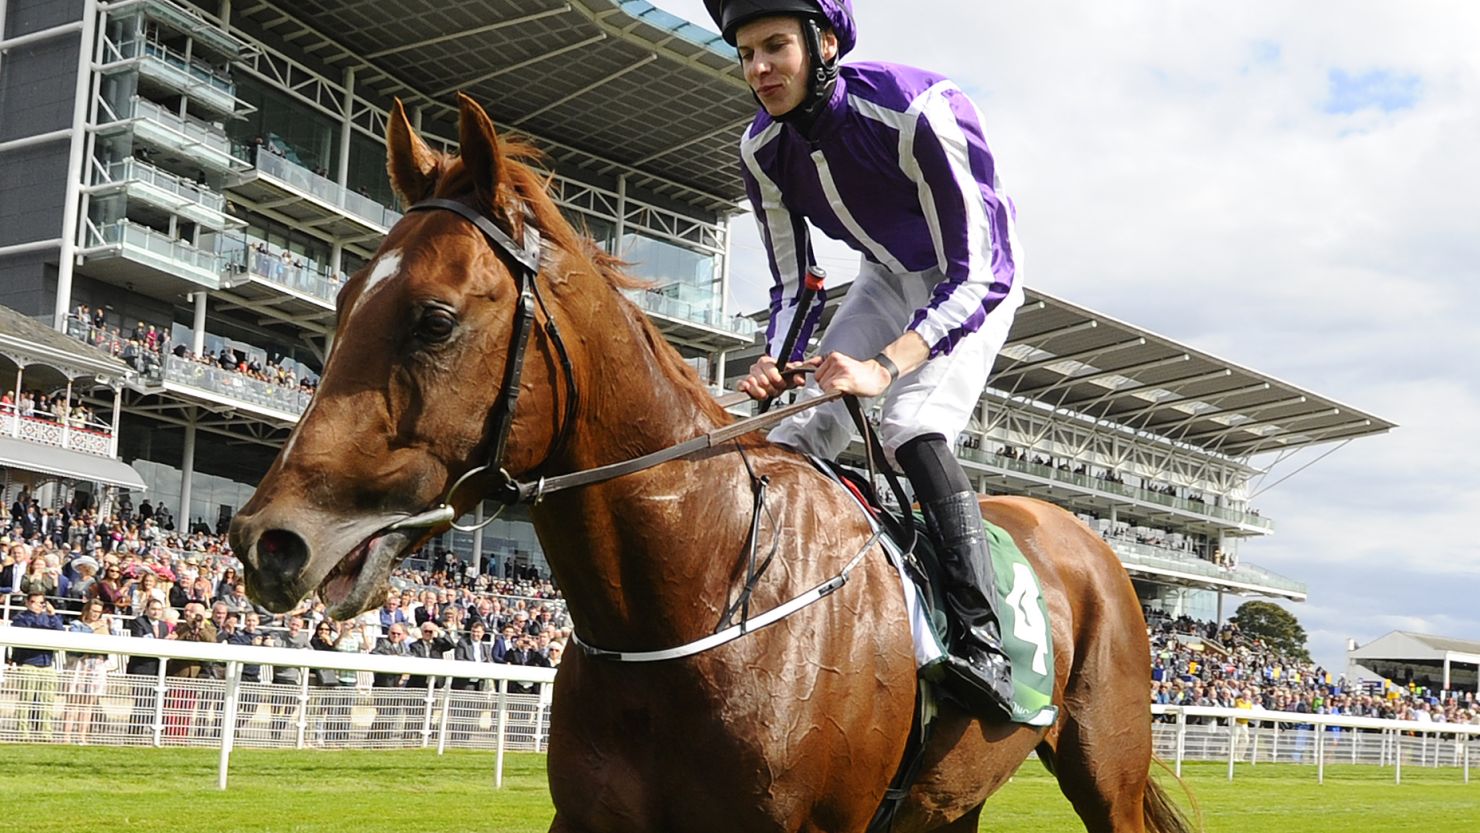 Joseph O'Brien and Australia return after winning the Juddmonte International Stakes at York racecourse on August 20.